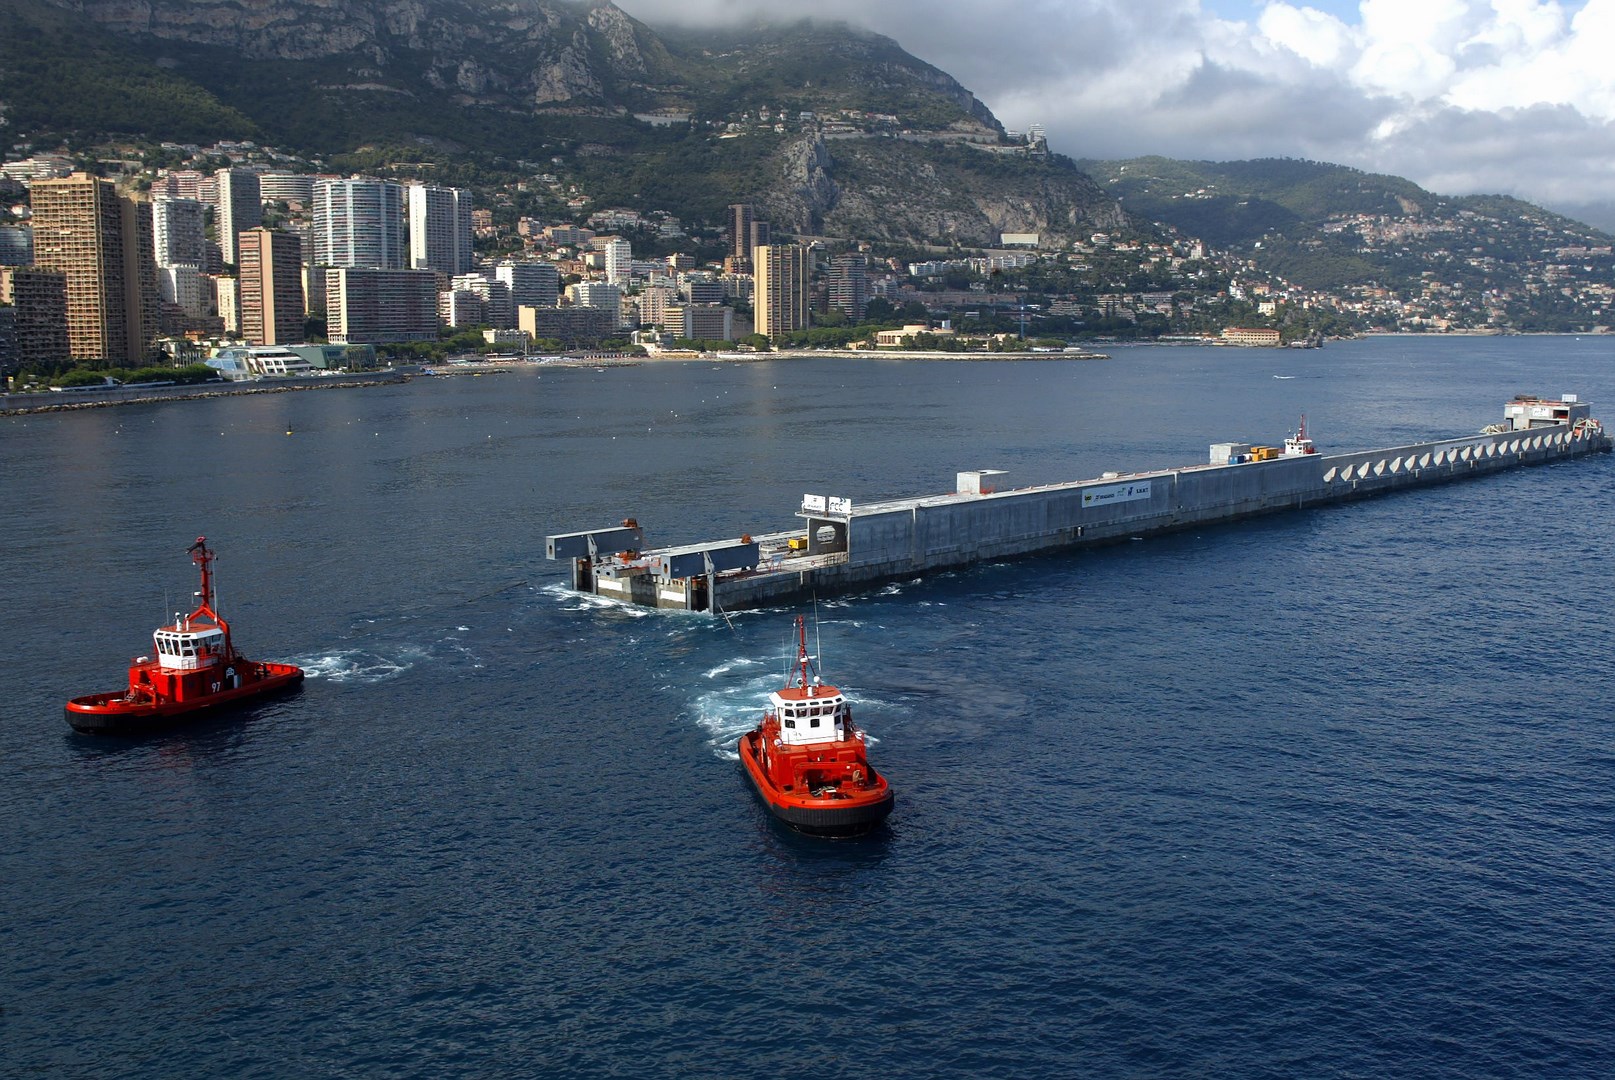 The floating dock being towed towards the Port of Monaco